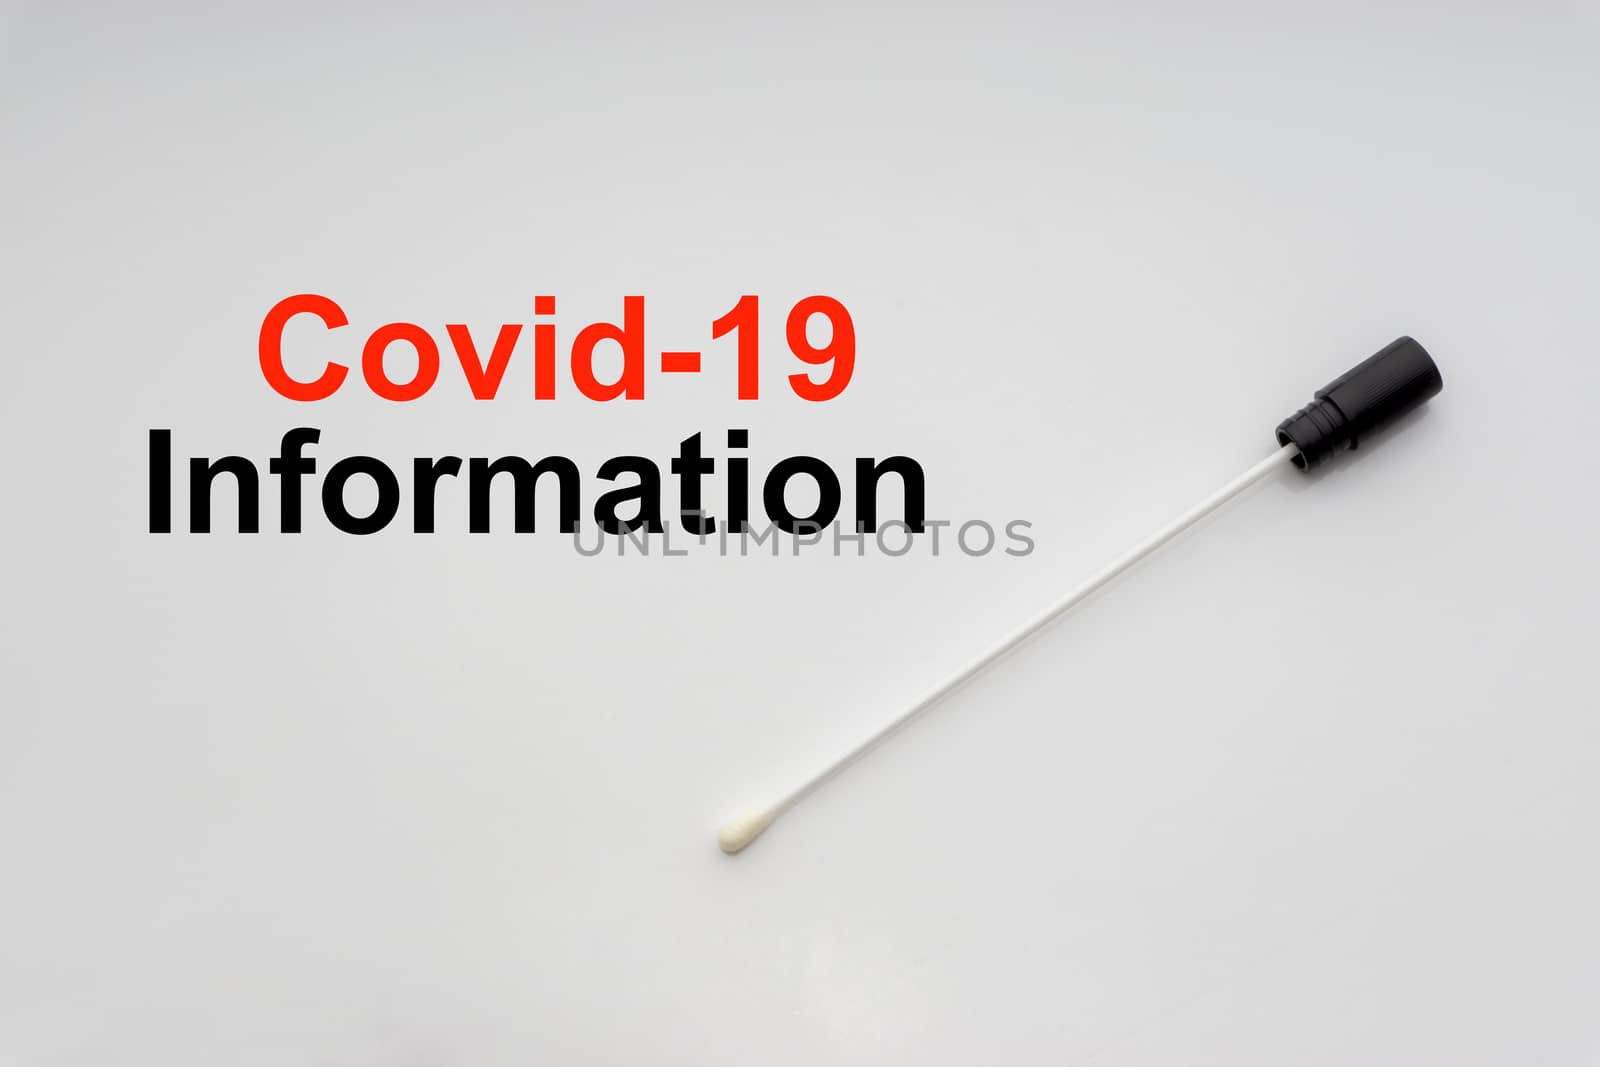 COVID-19 INFORMATION text with medical swab on white background by silverwings